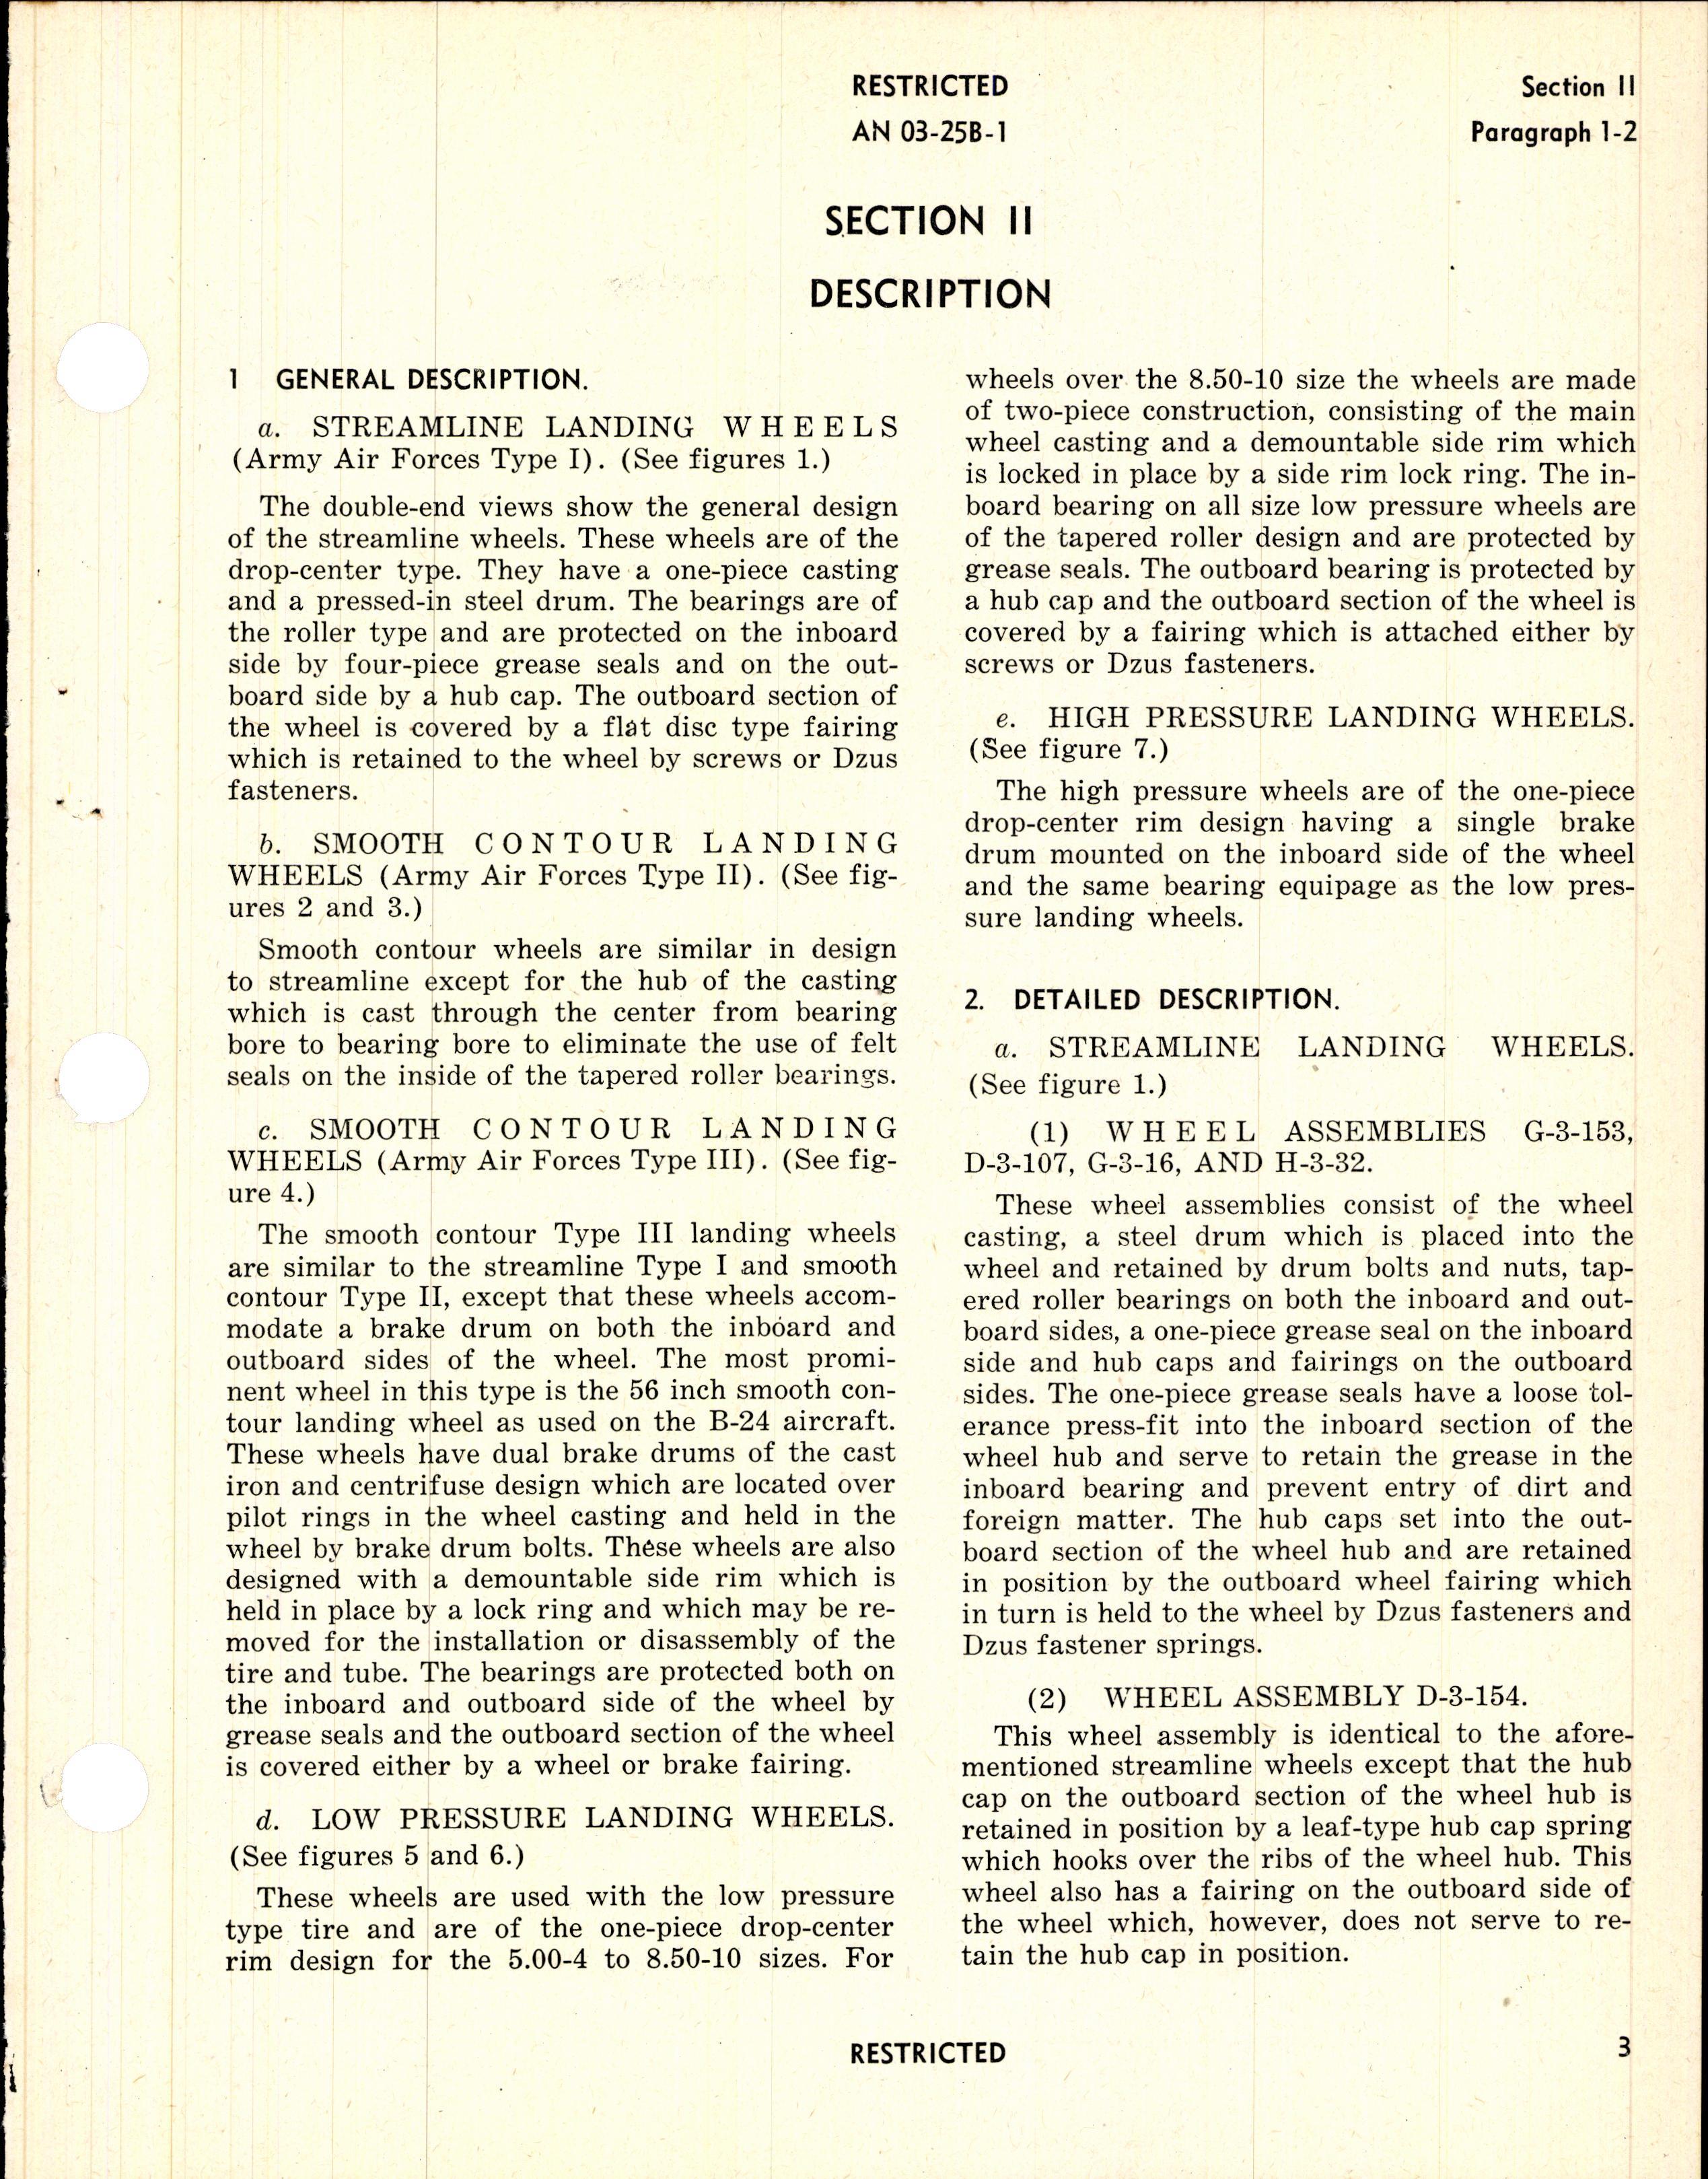 Sample page 7 from AirCorps Library document: Operation, Service, & Overhaul Instructions with Parts Catalog for Hayes Main Landing Wheels